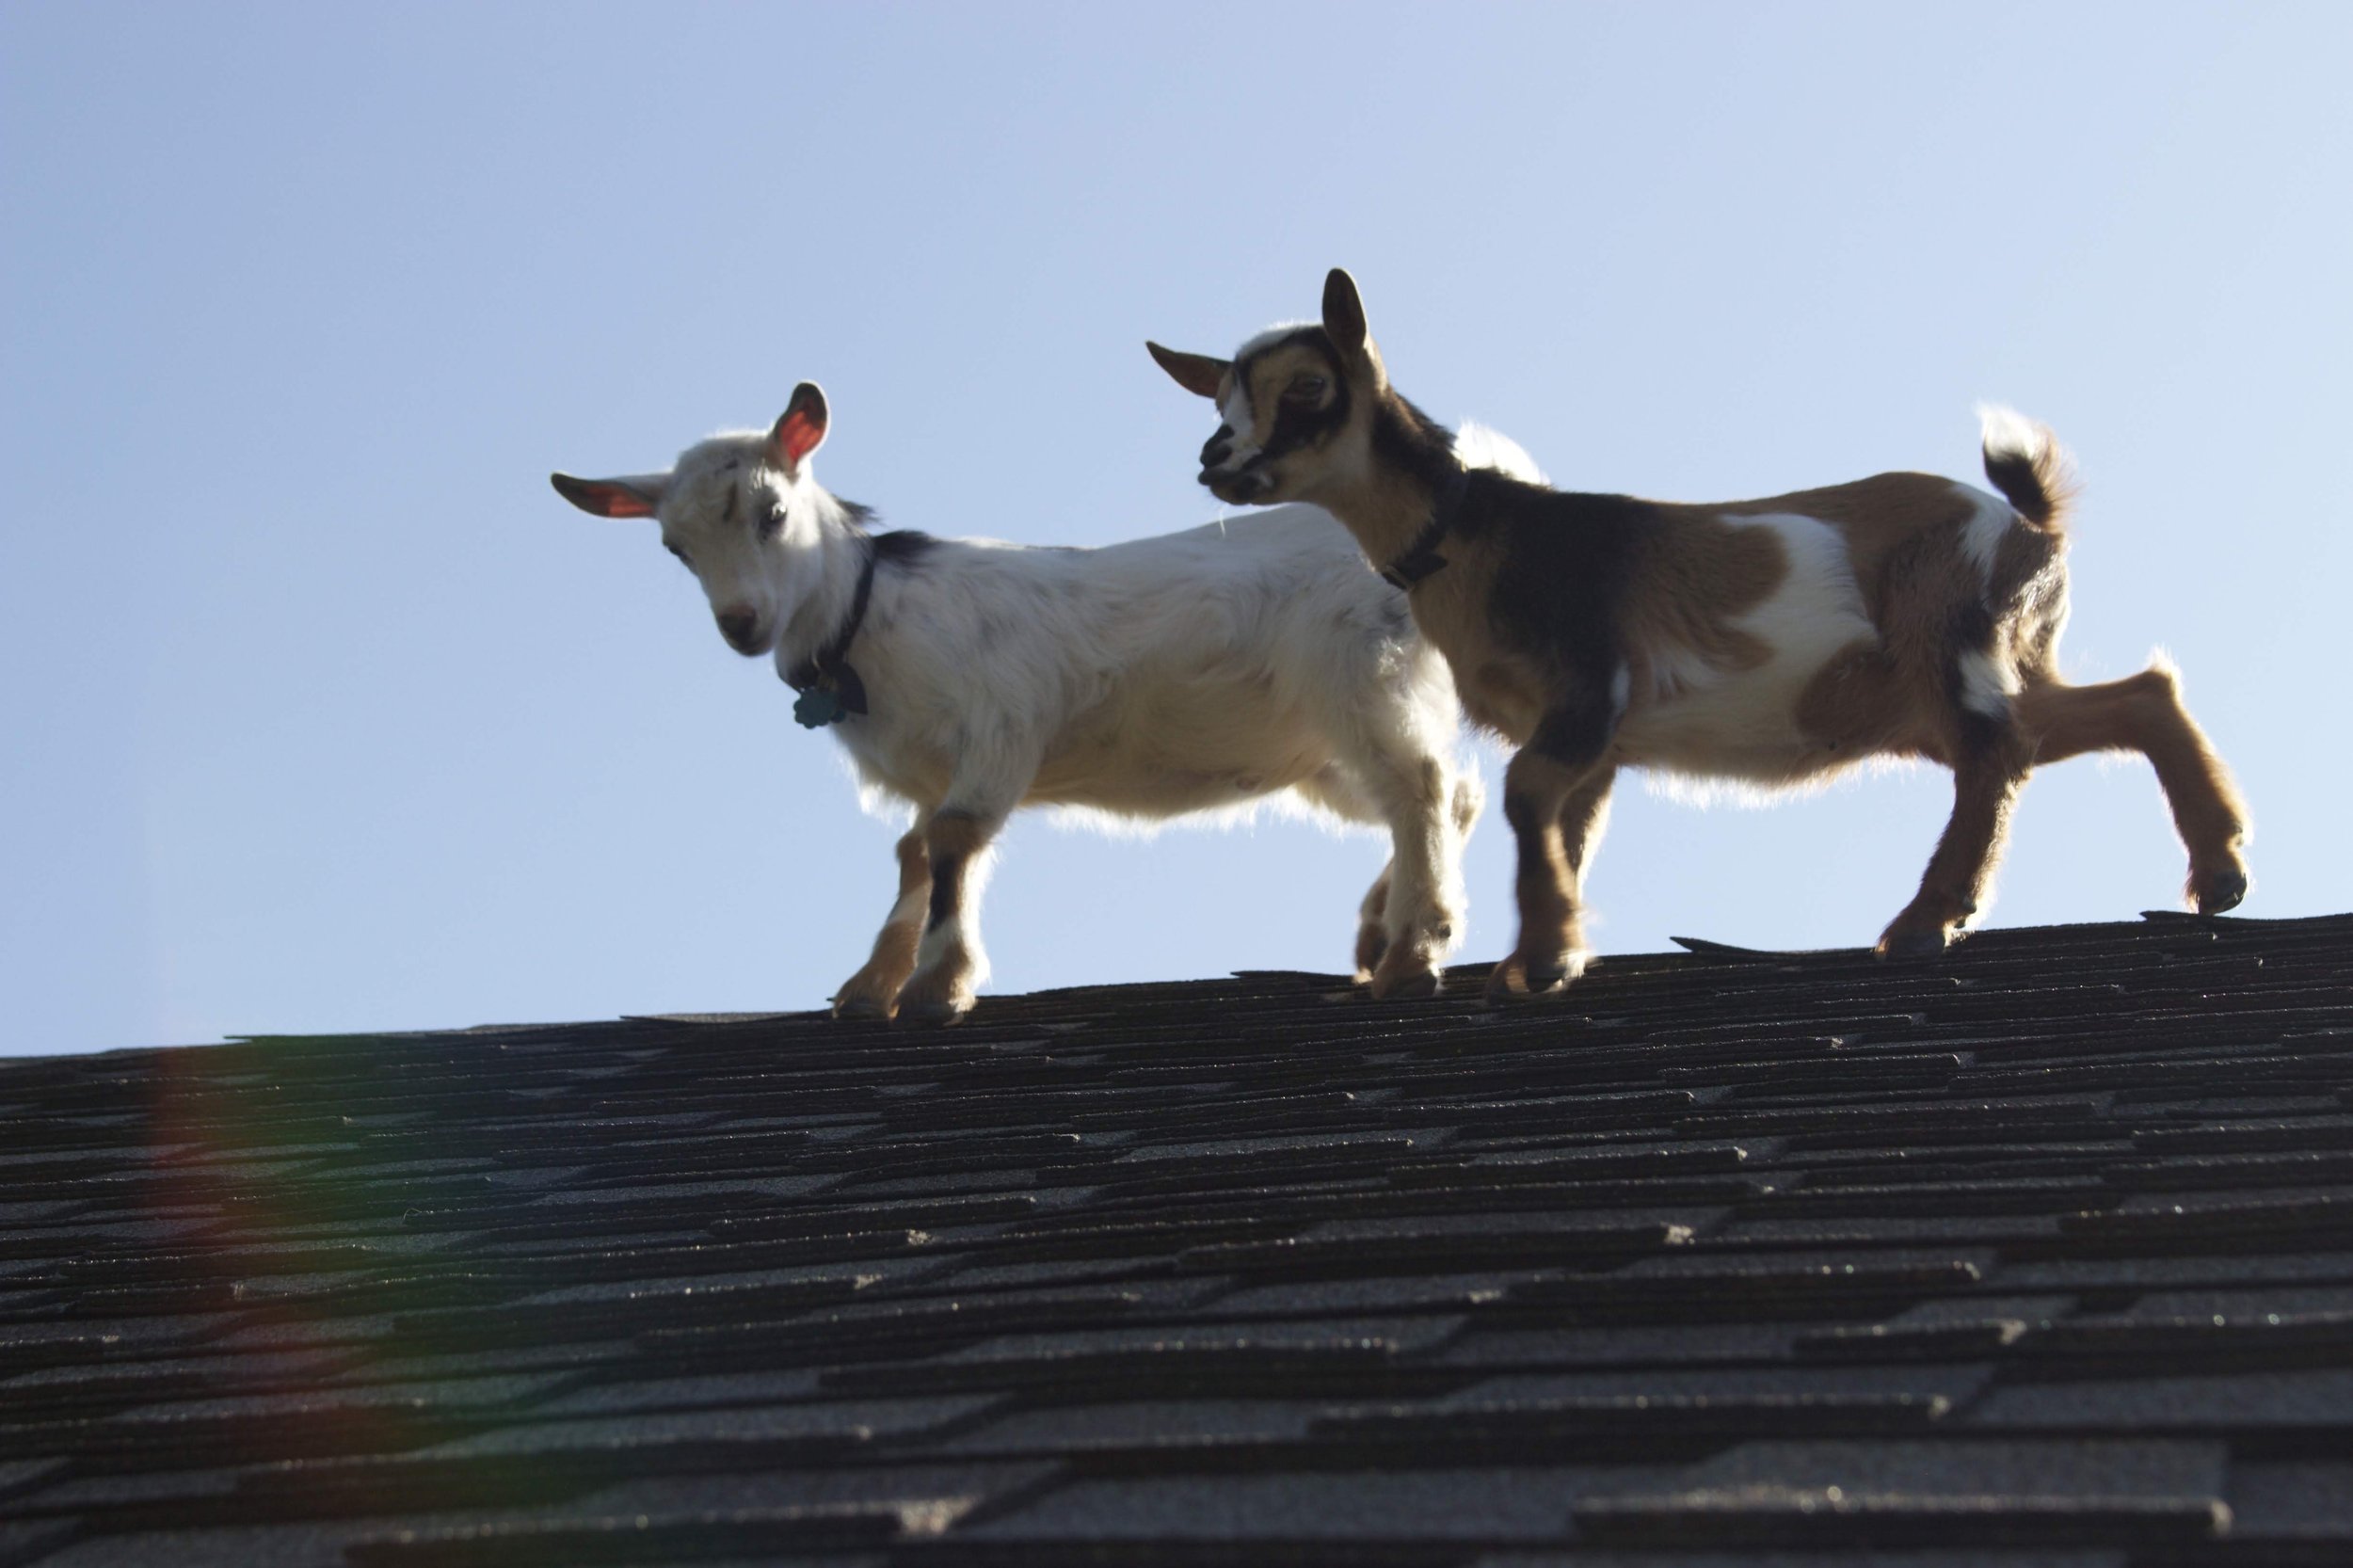 Goats on a Roof